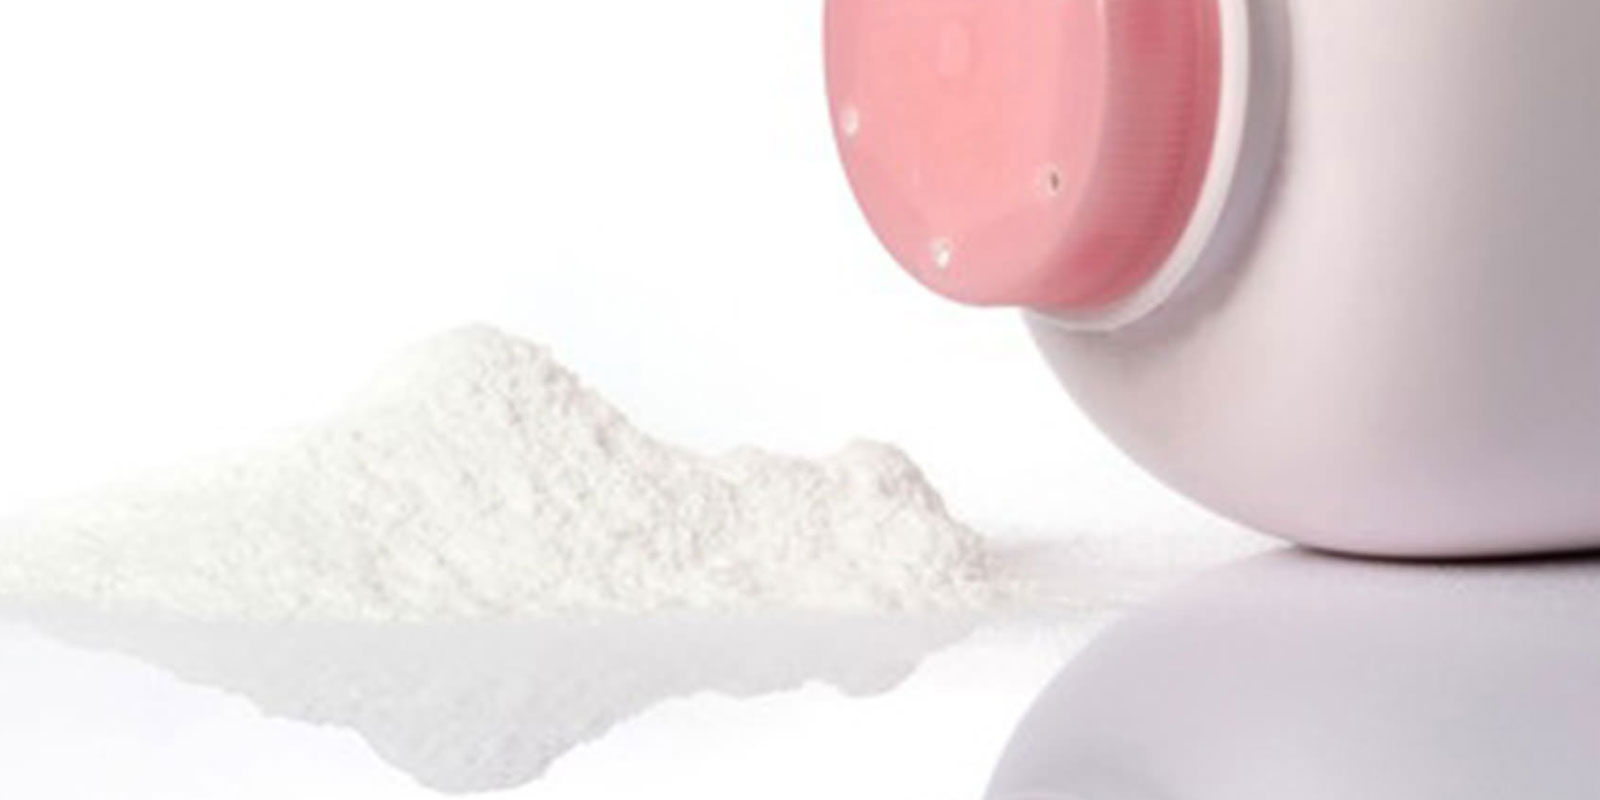 File a talc cancer lawsuit with a talc lawsuit attorney.